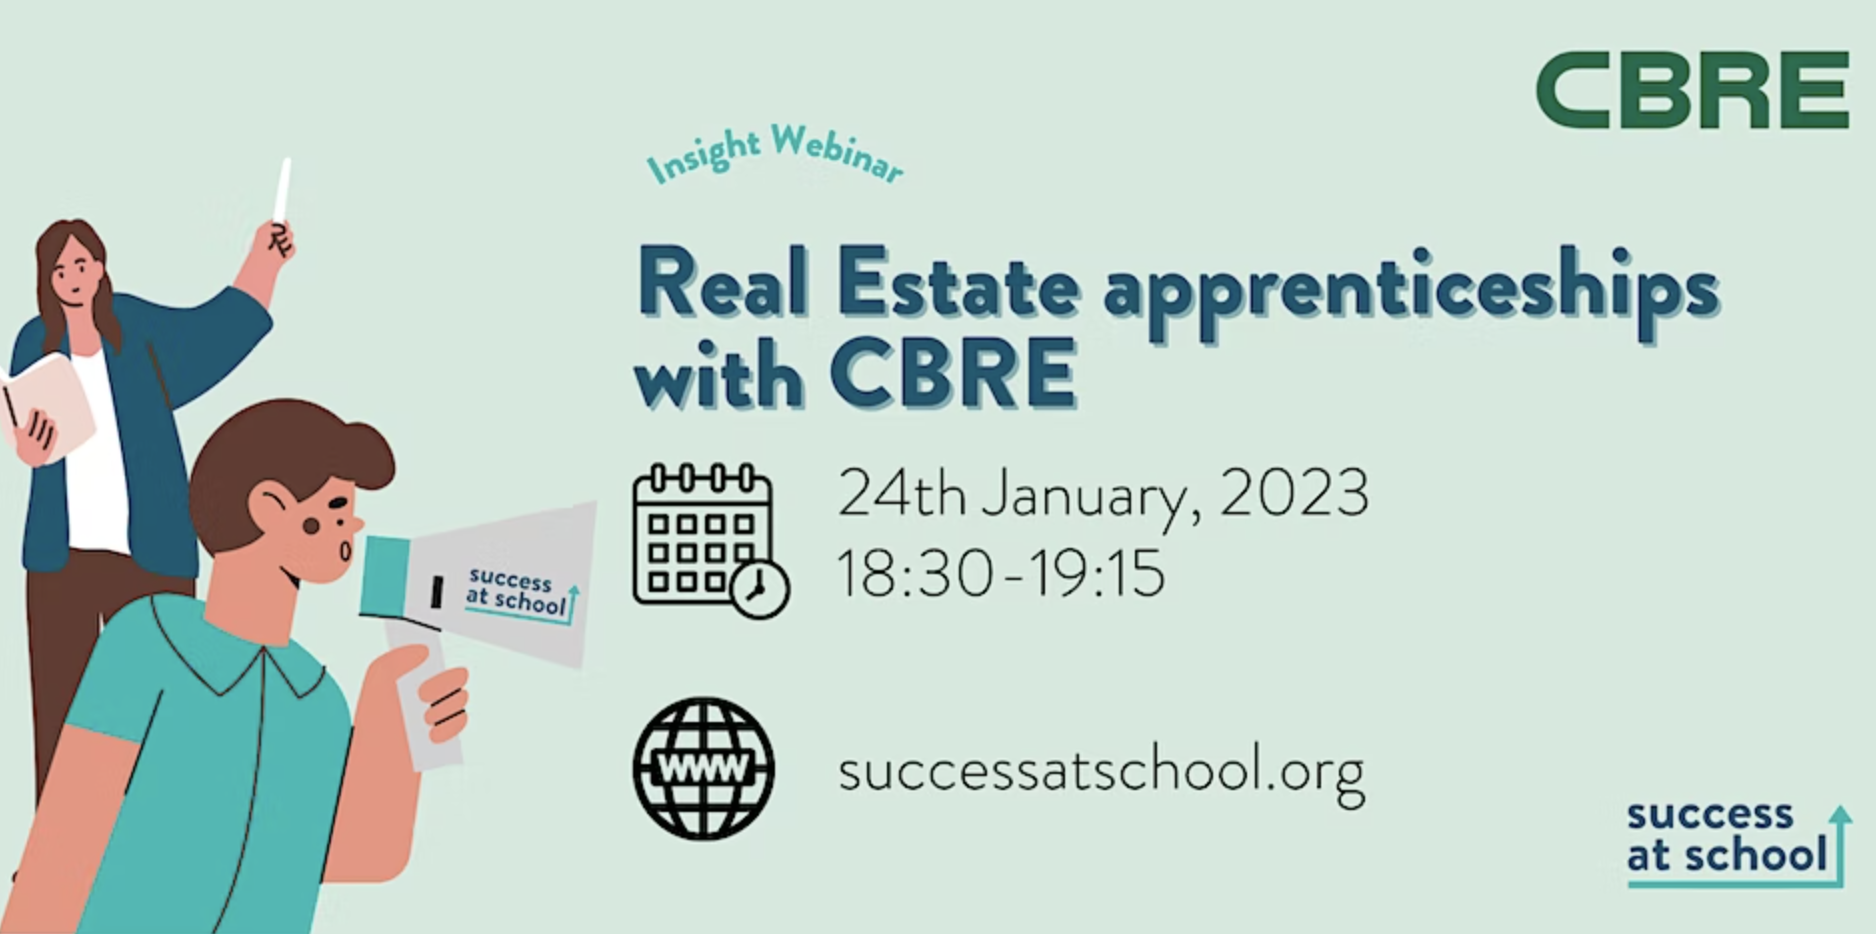 Image of apprenticeship opportunities with CBRE webinar promotion